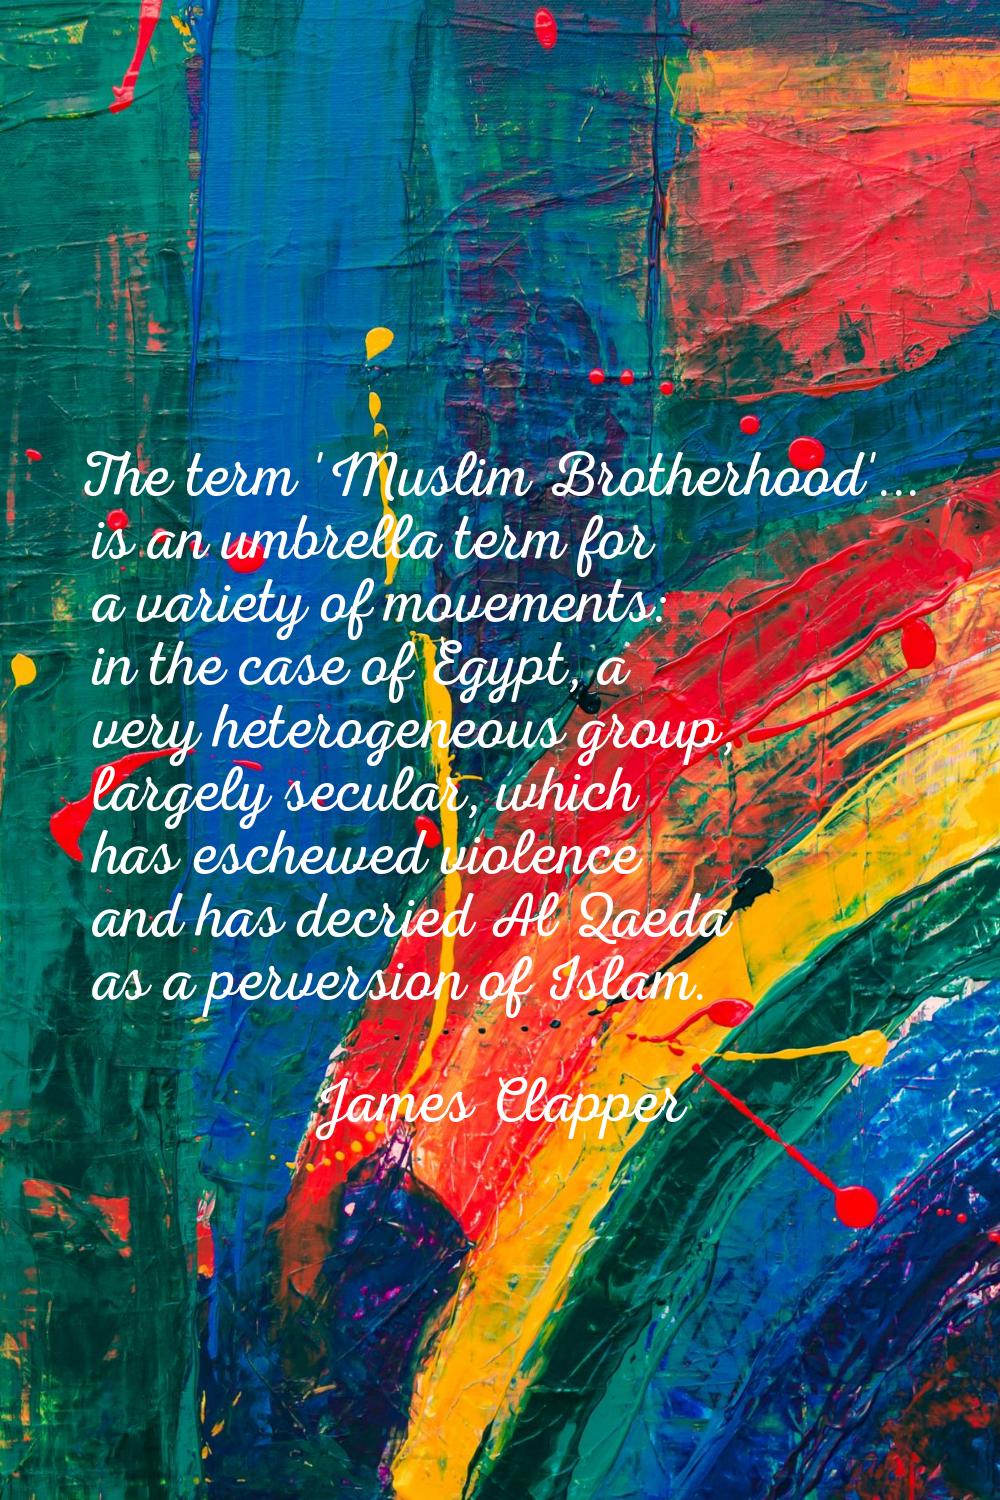 The term 'Muslim Brotherhood'... is an umbrella term for a variety of movements: in the case of Egy